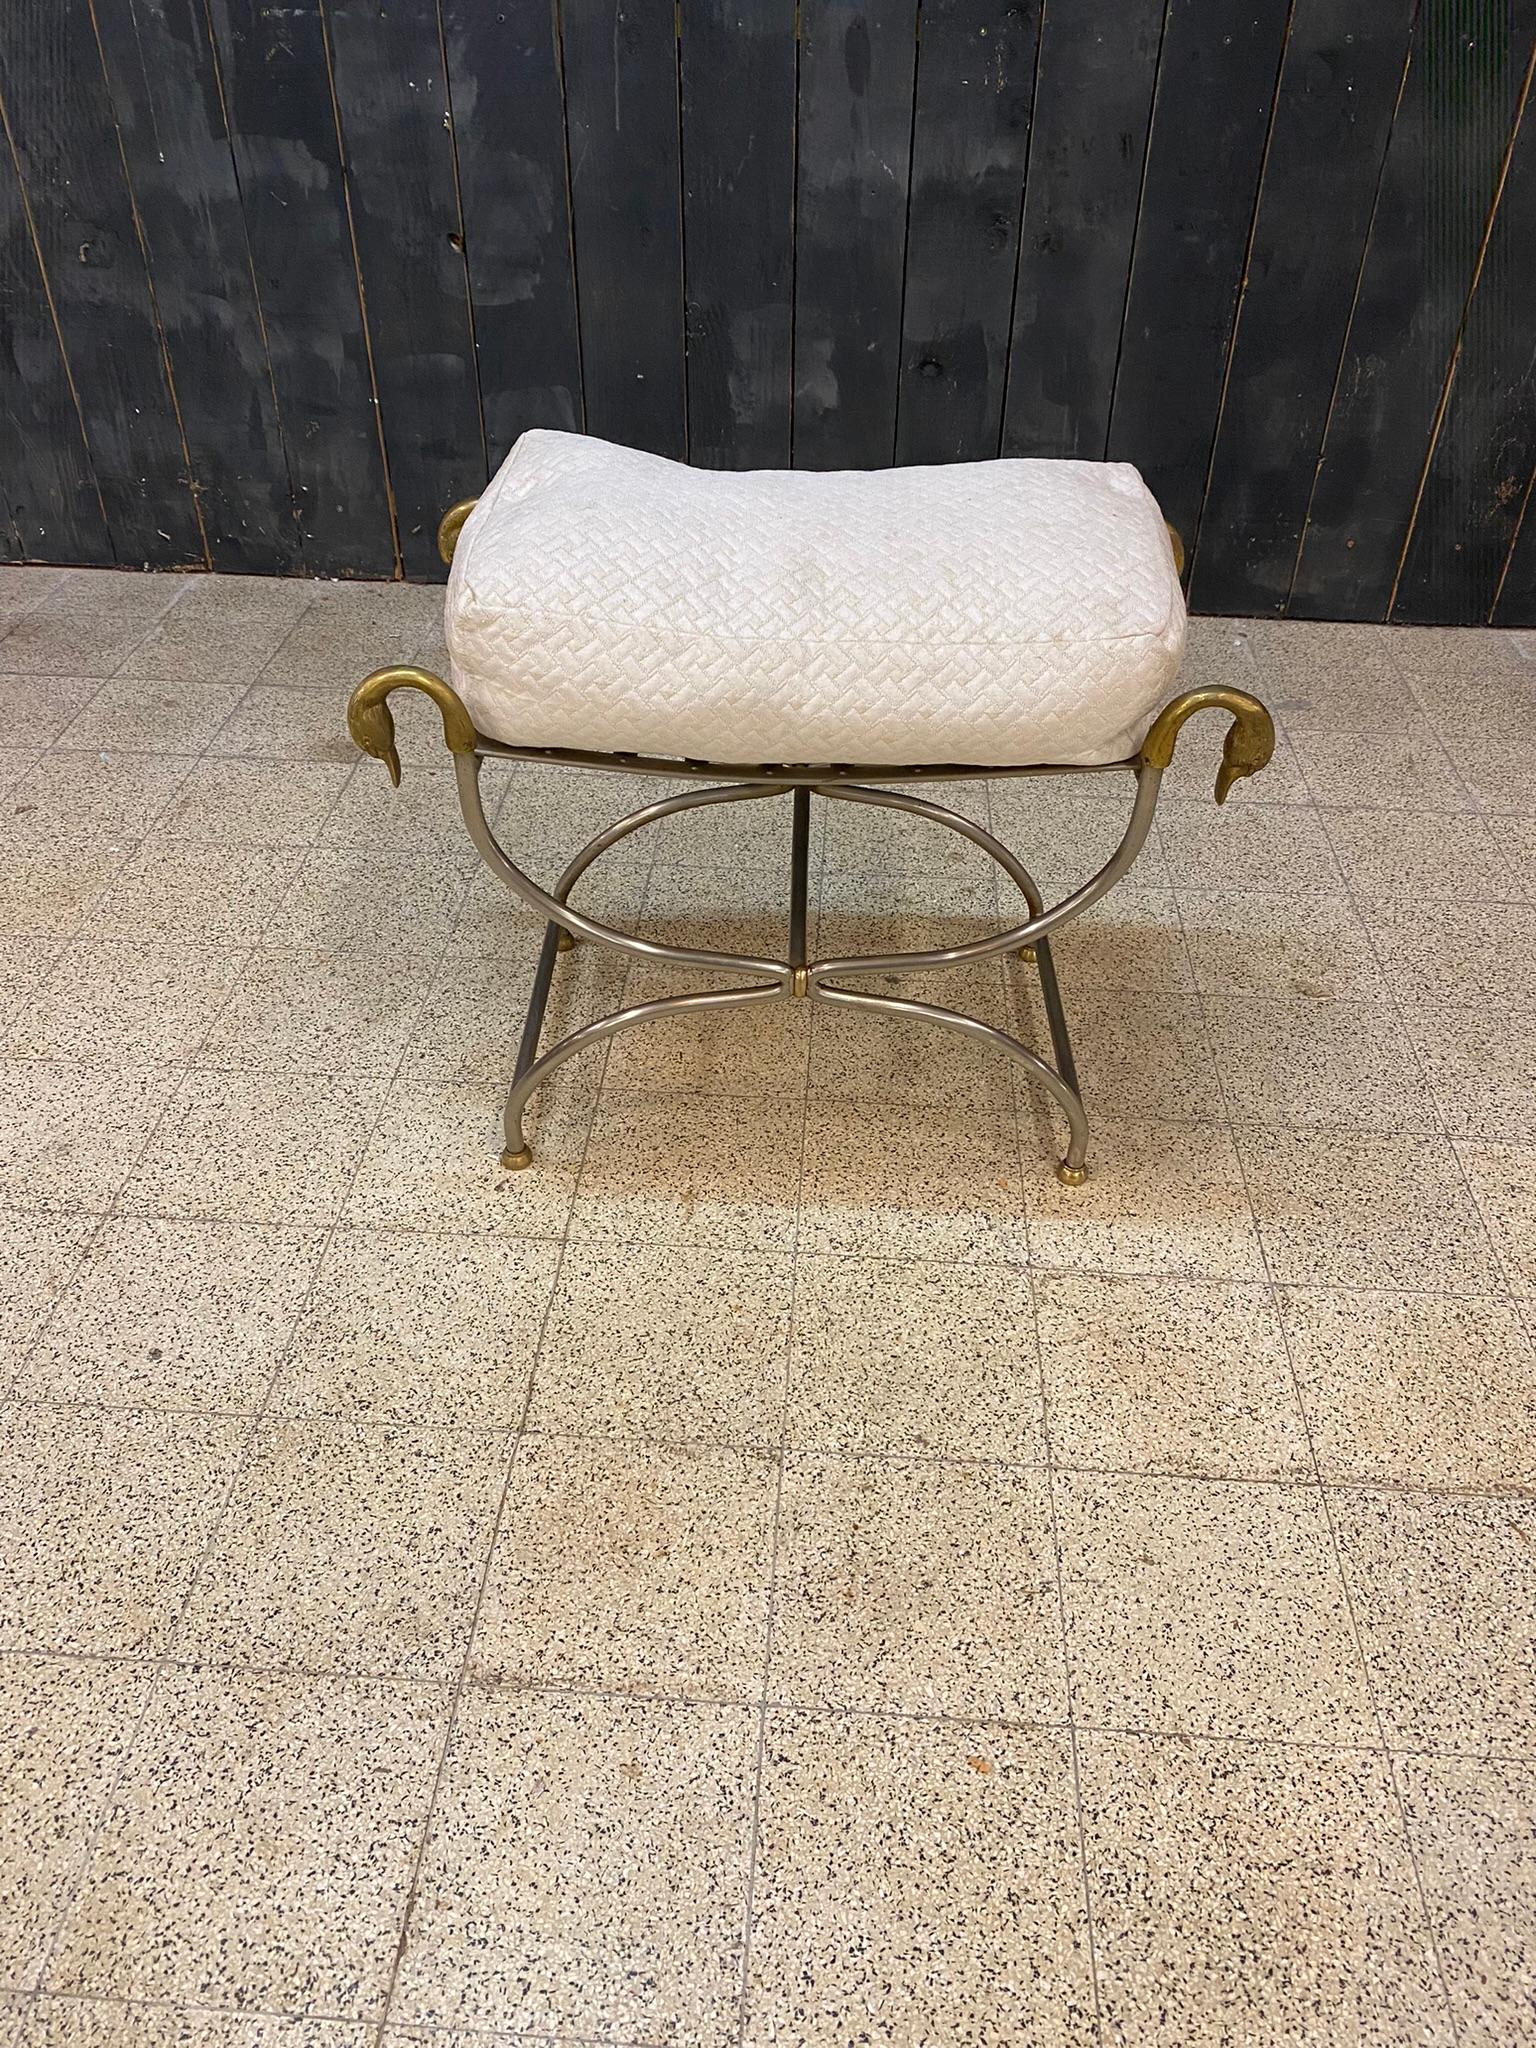 Maison Jansen, Curulle Stool in Steel and Brass, circa 1950/1960 For Sale 7